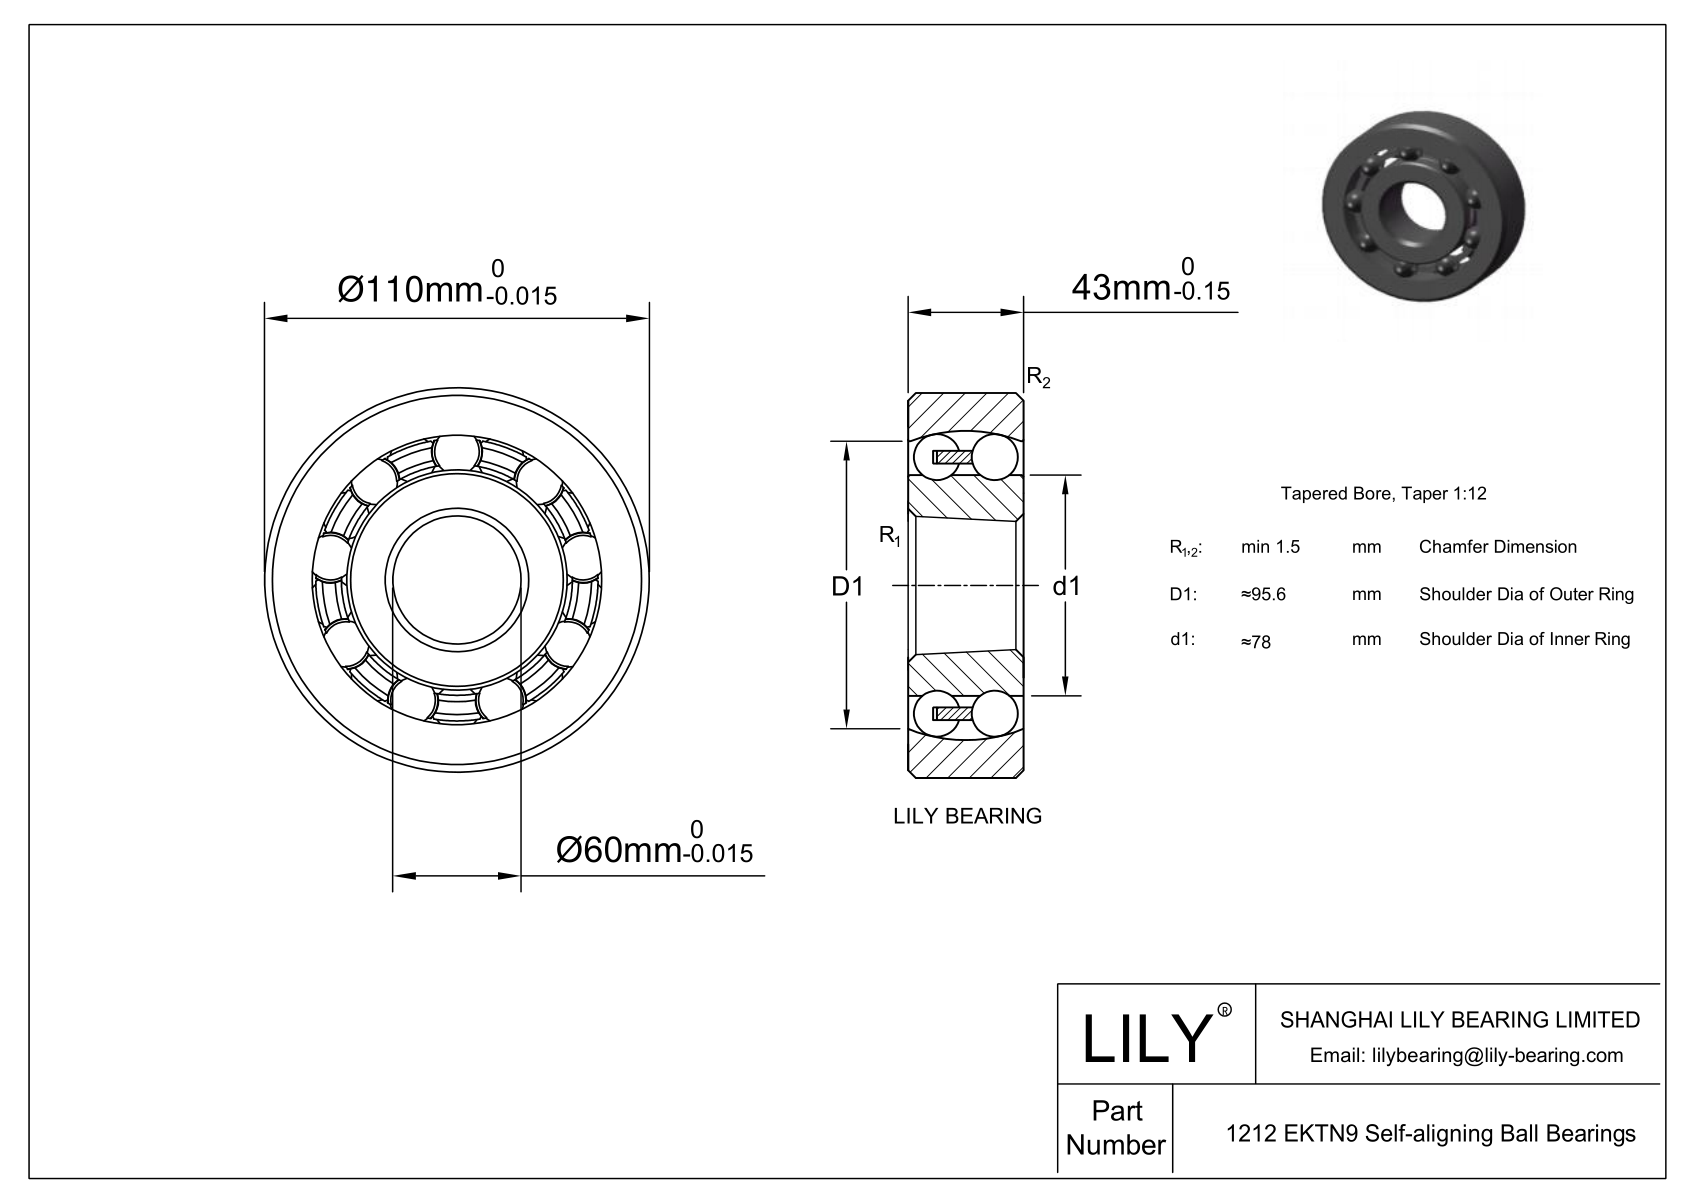 CE1212SC Silicon Carbide Self Aligning Ball Bearings cad drawing